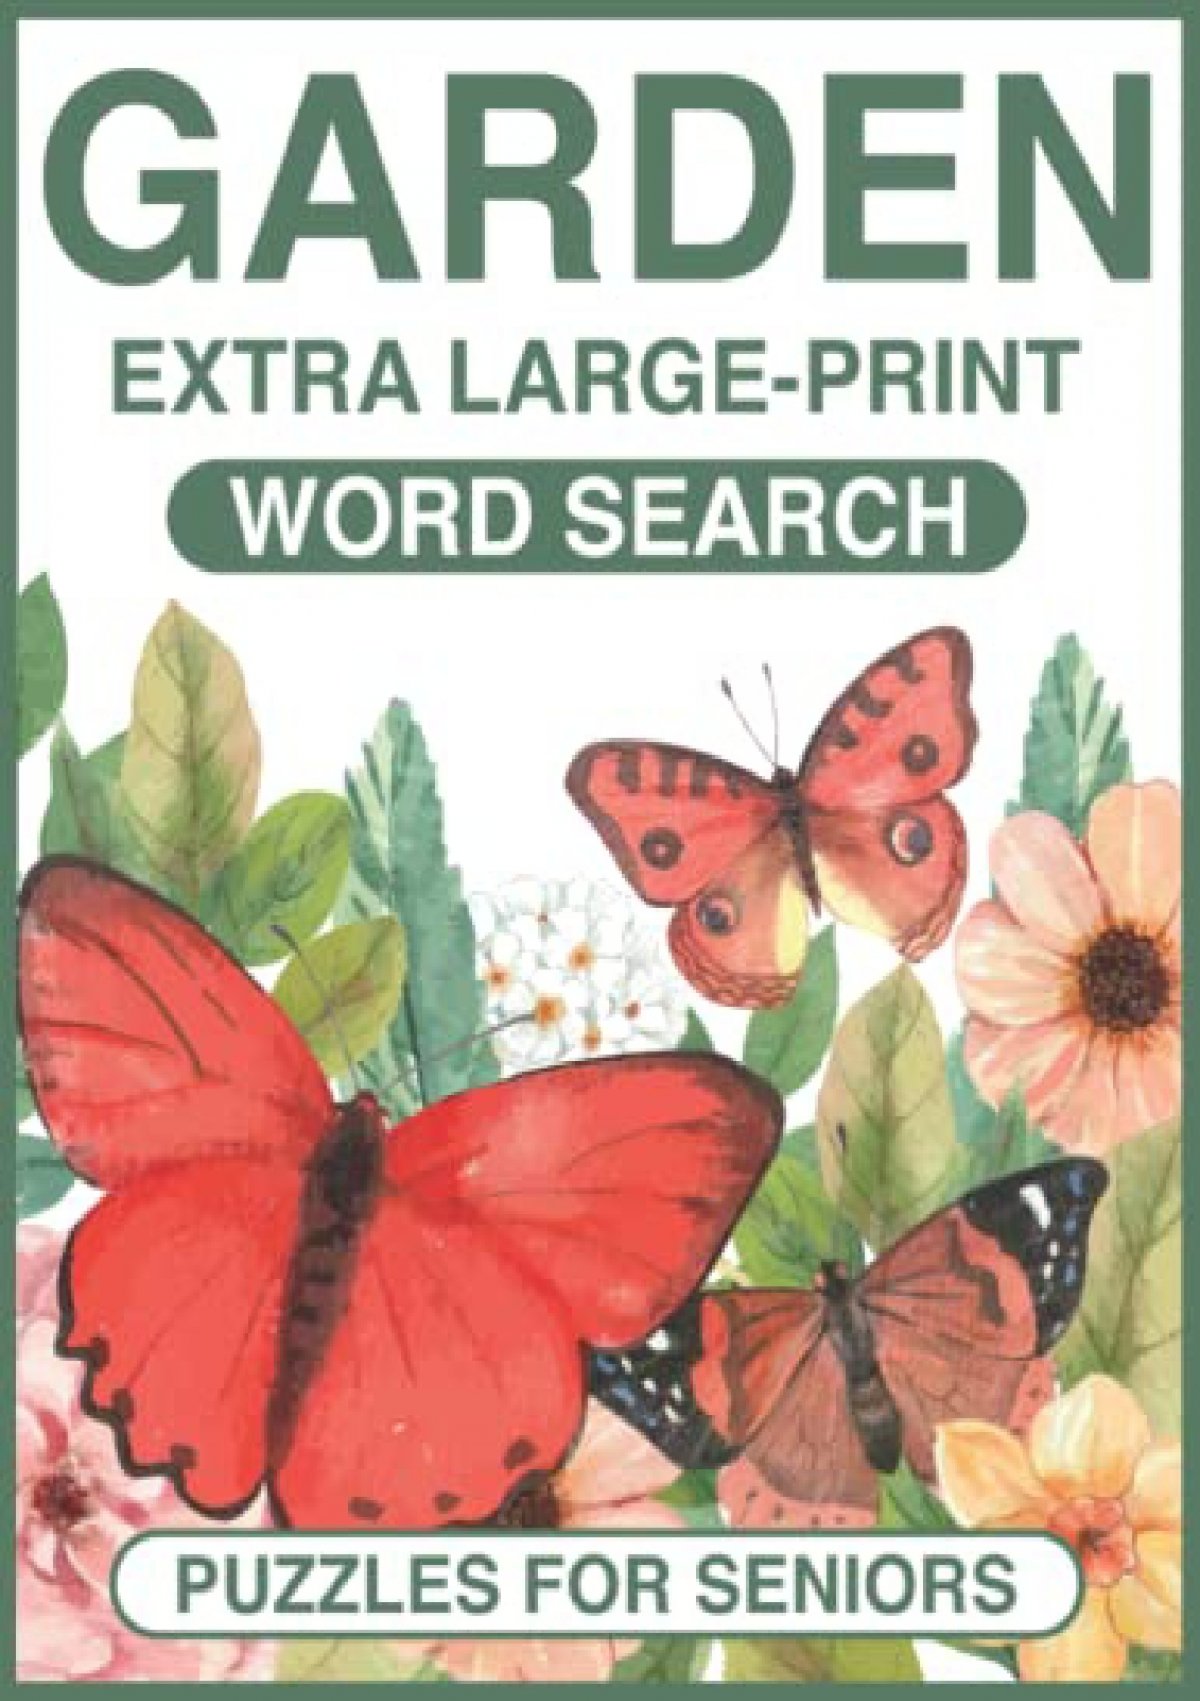 pdf-download-garden-extra-large-print-word-search-puzzles-for-seniors-garden-themed-word-search